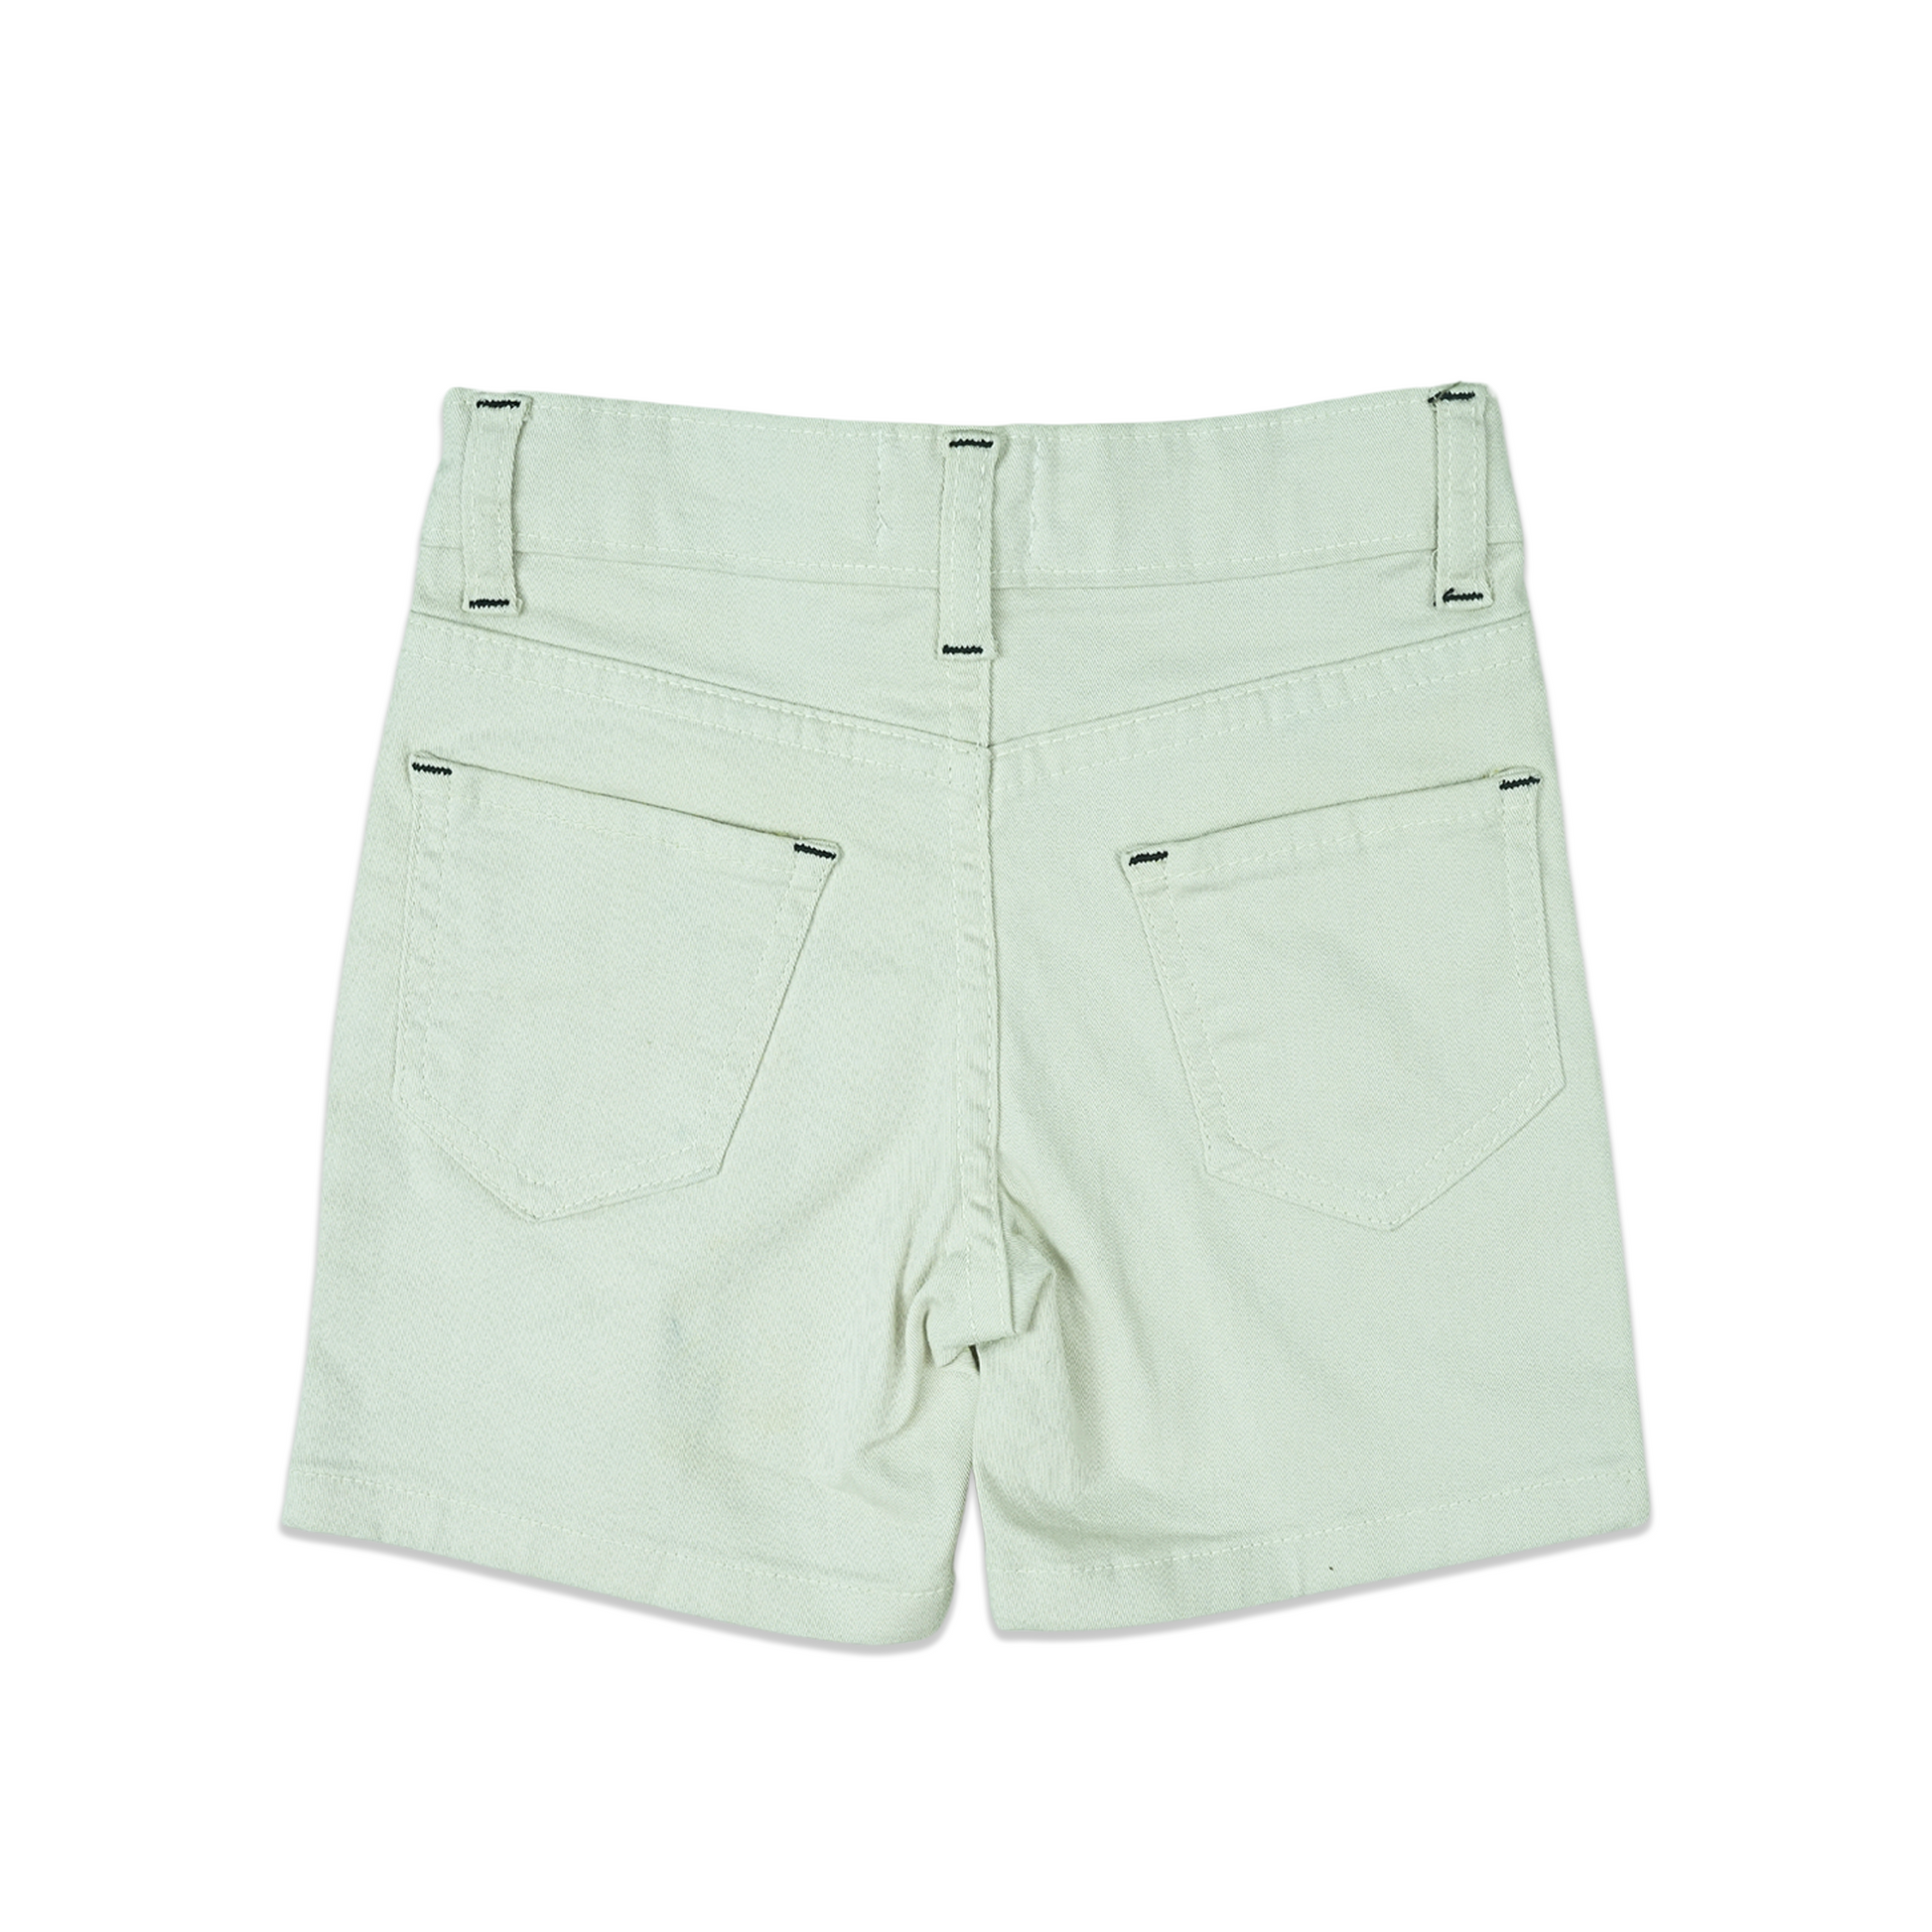 White colored shorts for boys - Miniwears